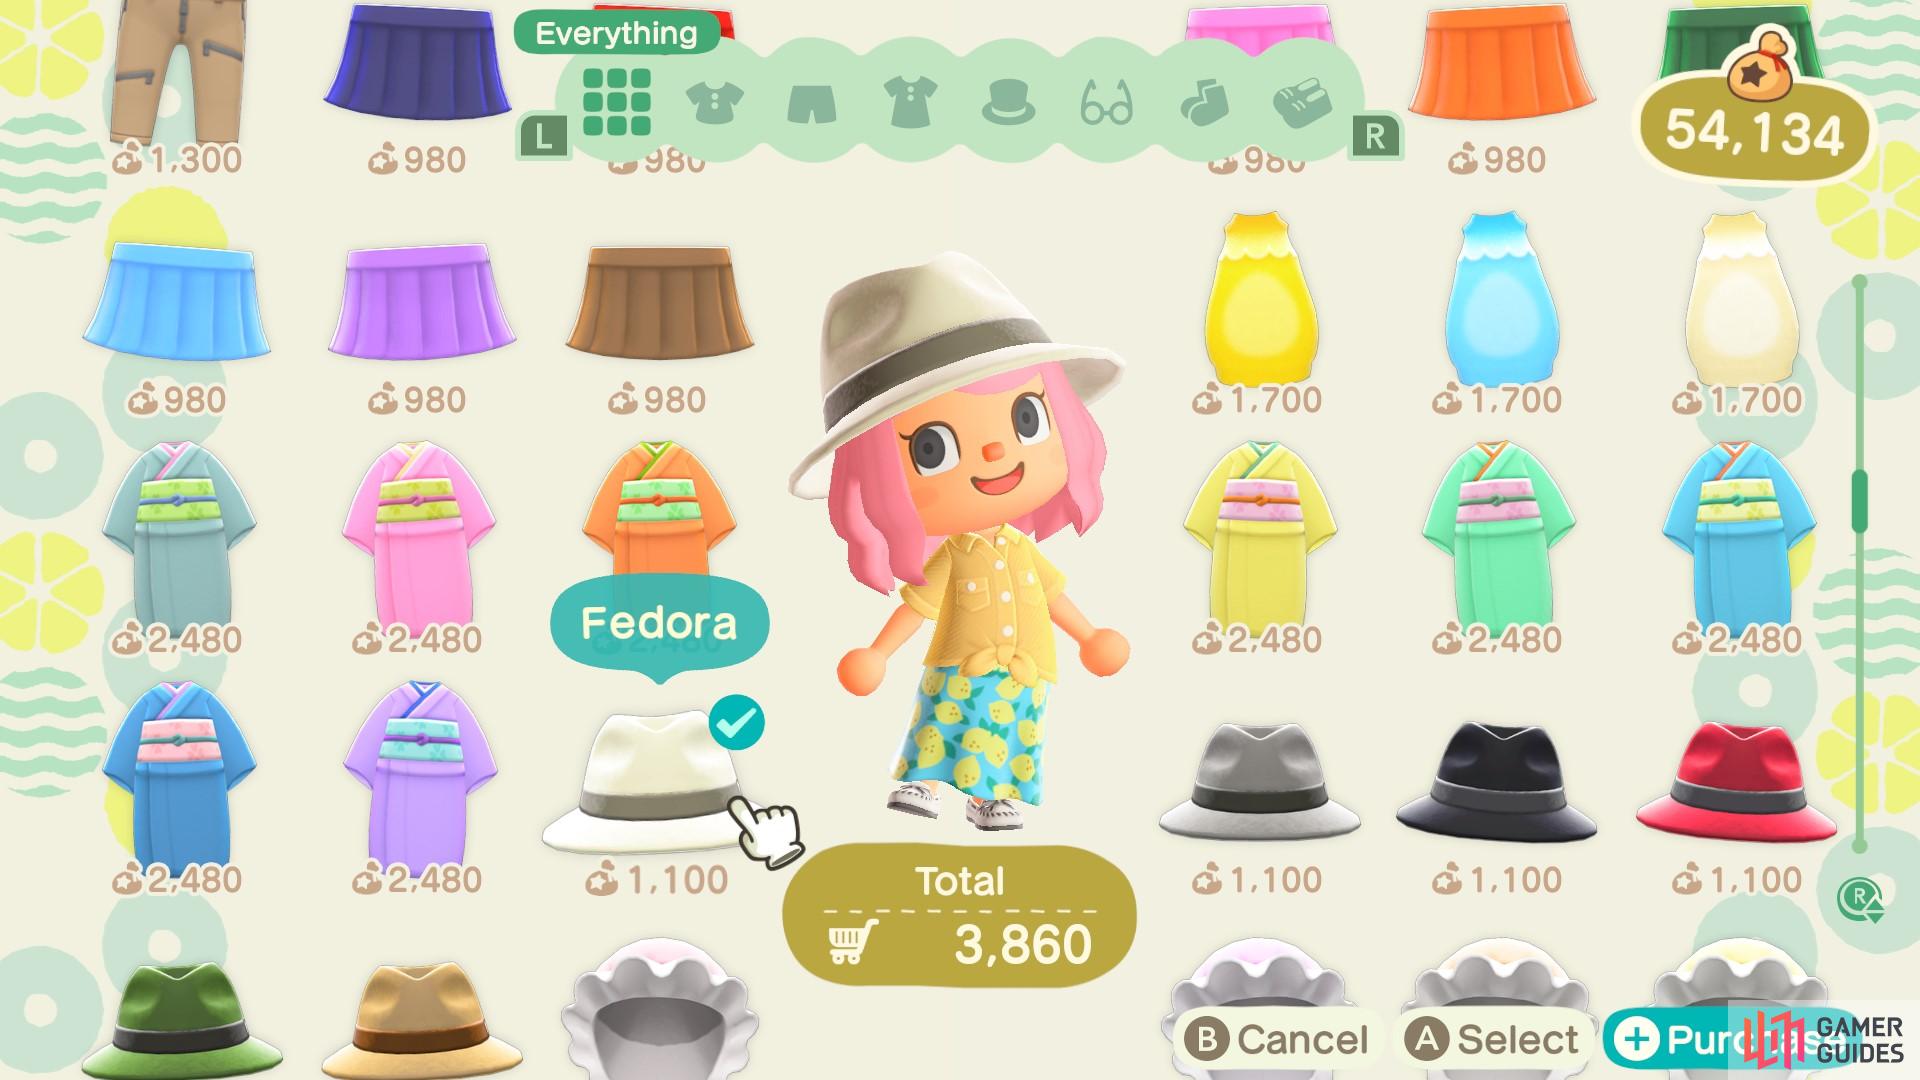 and you can buy entire outfits at once!